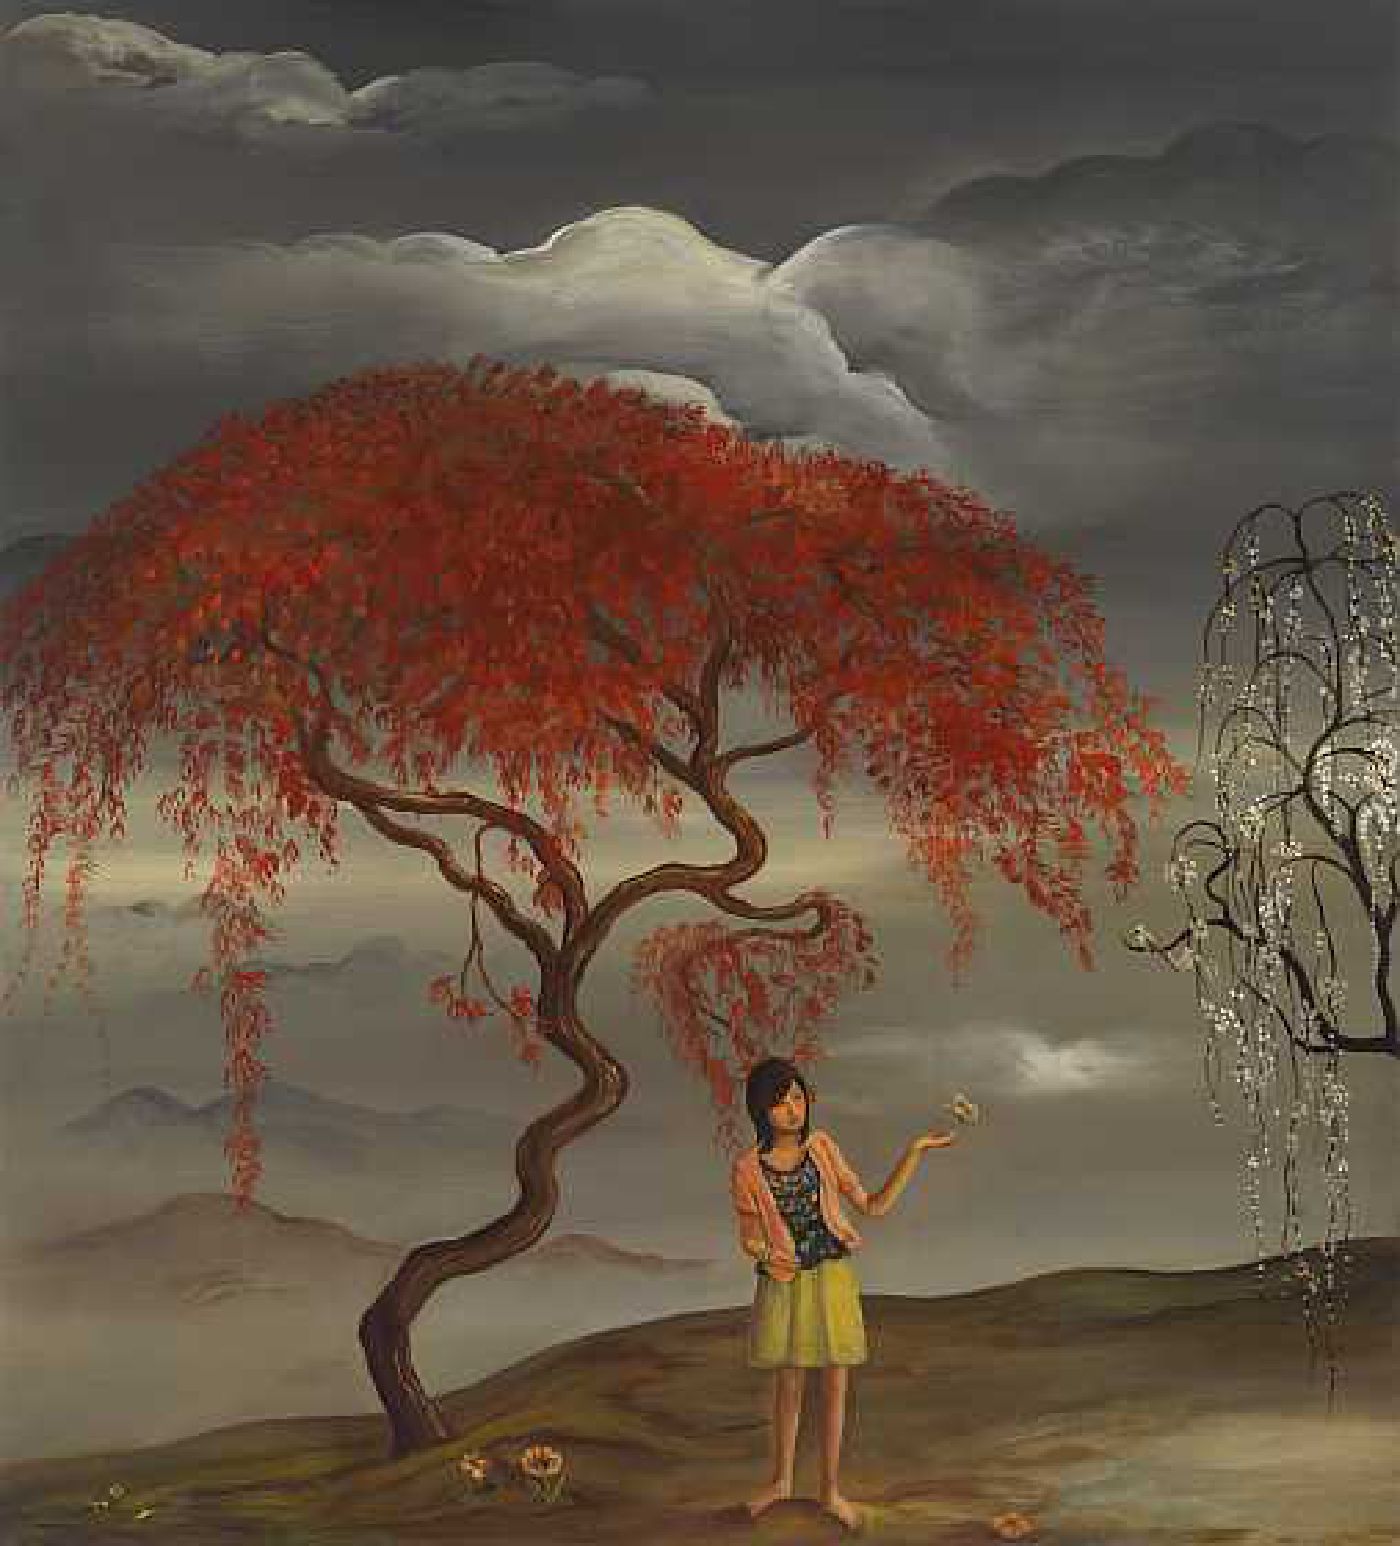 Isabel in Imaginary Landscape  -  oil on canvas,  32 x 29 inches, 2011